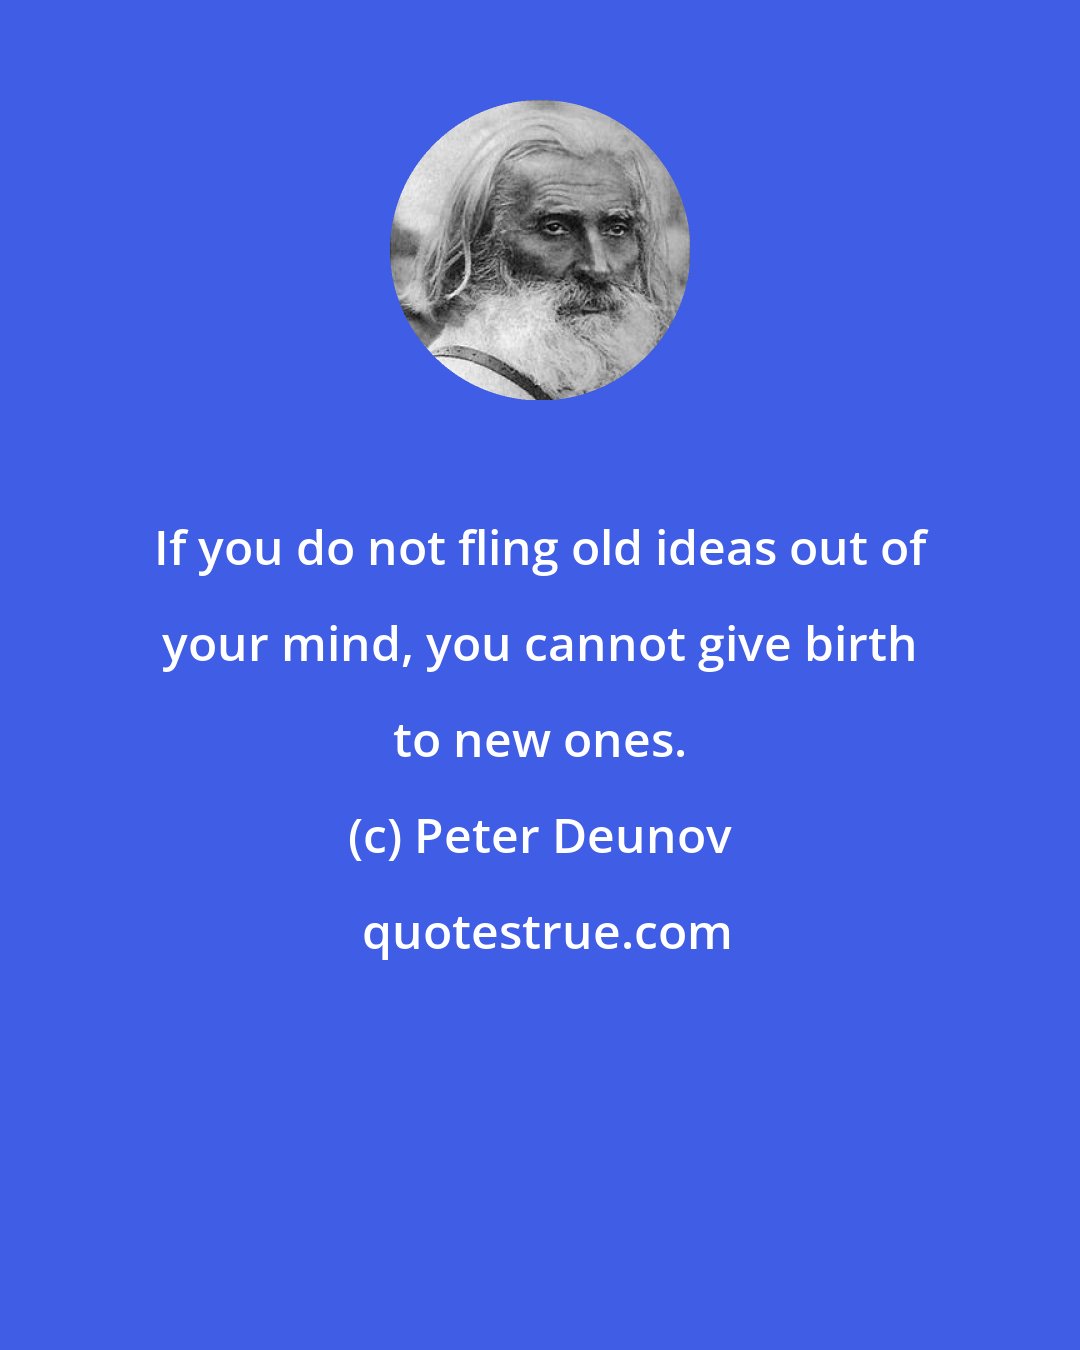 Peter Deunov: If you do not fling old ideas out of your mind, you cannot give birth to new ones.